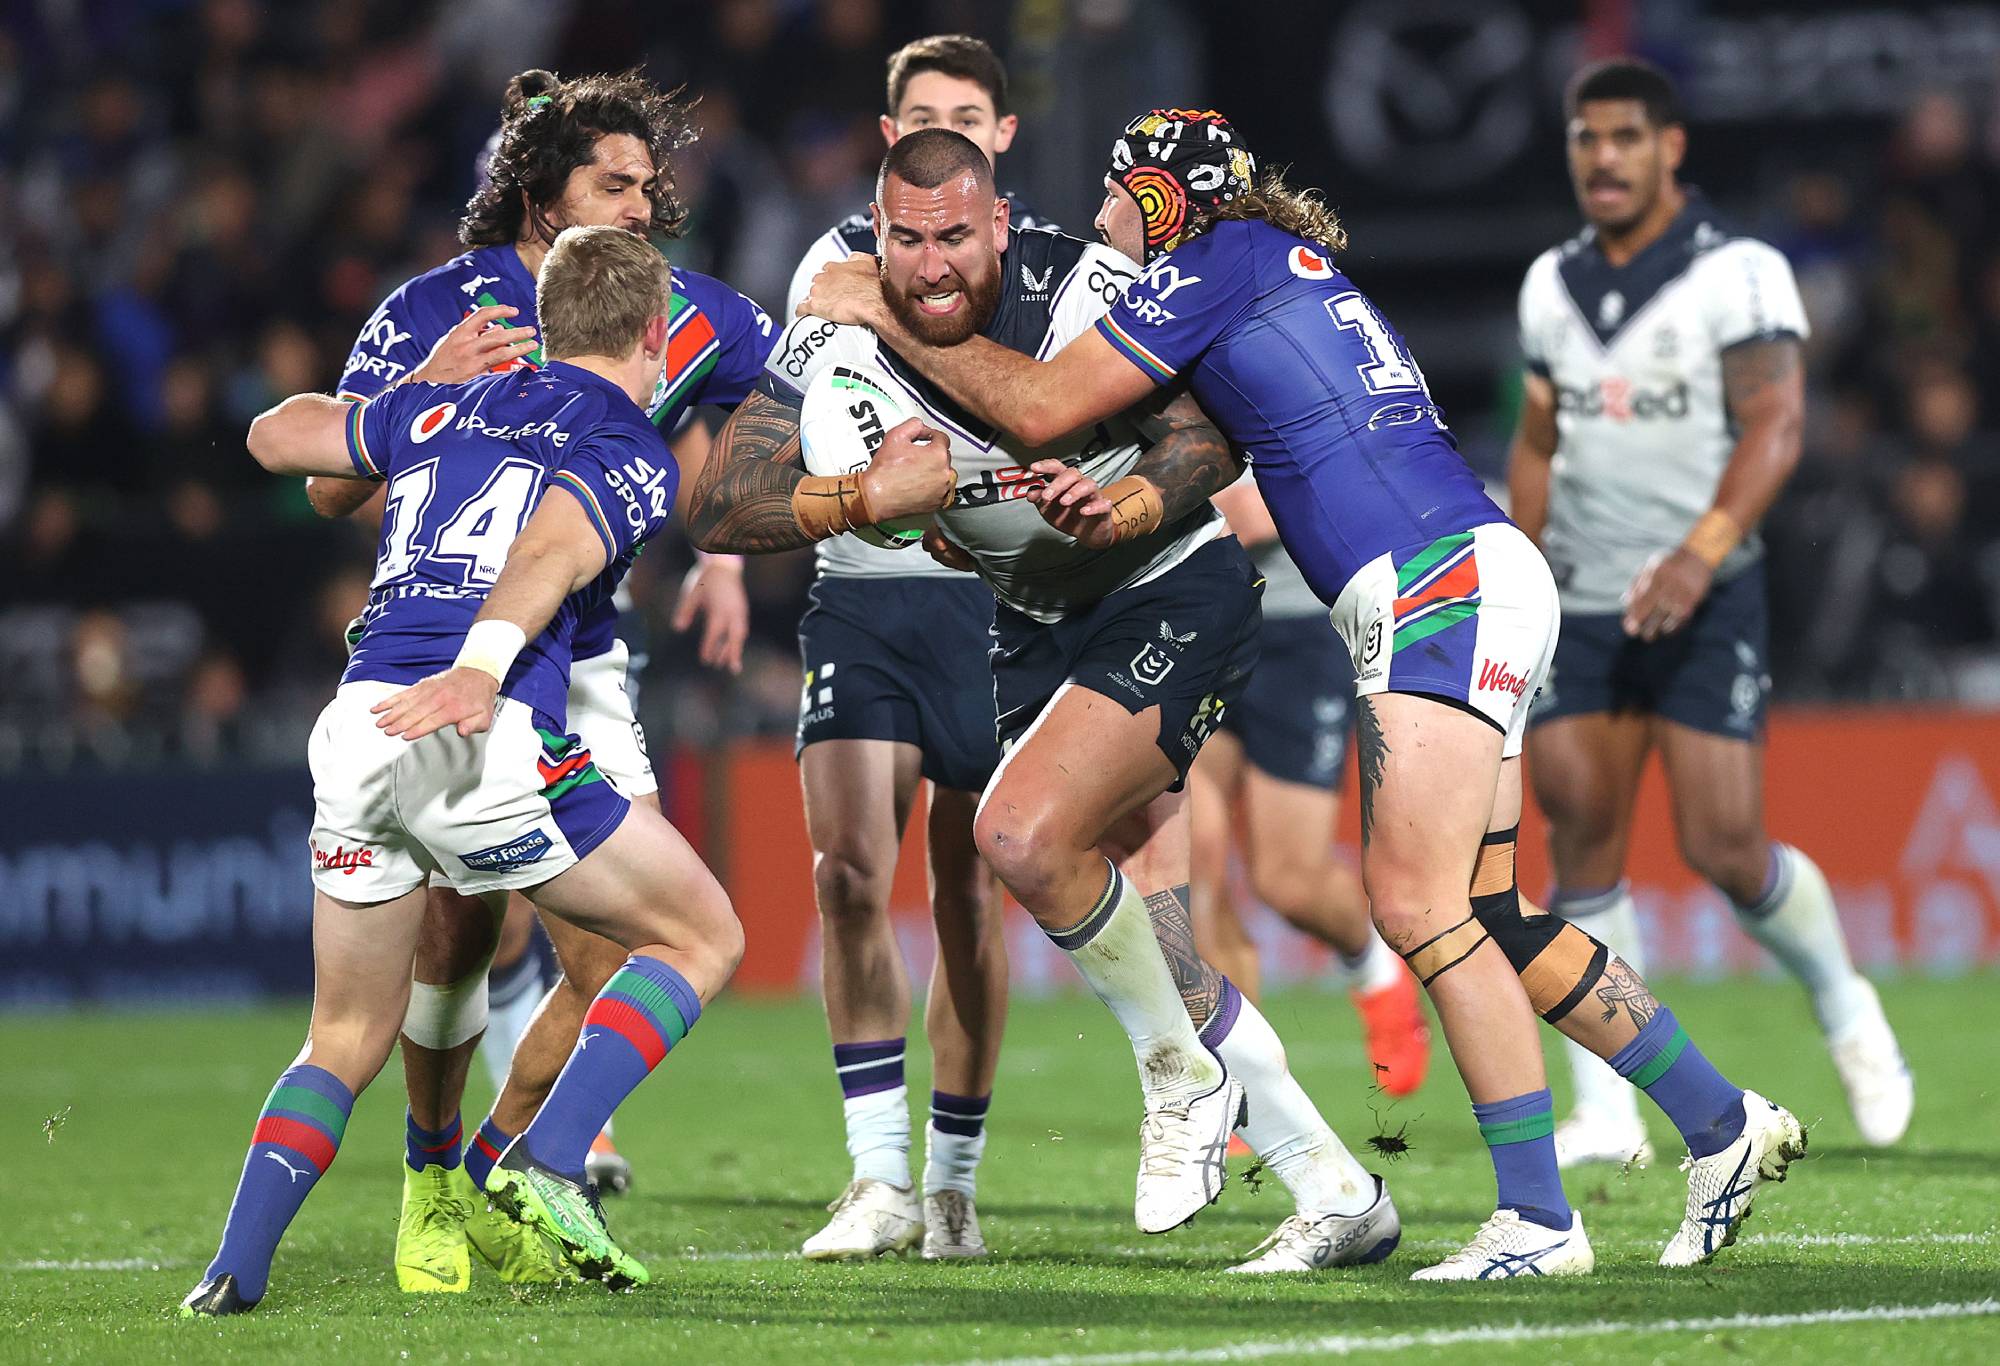 AUCKLAND, NEW ZEALAND - JULY 29: Nelson Asofa-Solomona of the Storm runs is tackled by Josh Curran of the Warriors during the round 20 NRL match between the New Zealand Warriors and the Melbourne Storm at Mt Smart Stadium, on July 29, 2022, in Auckland, New Zealand. (Photo by Phil Walter/Getty Images)